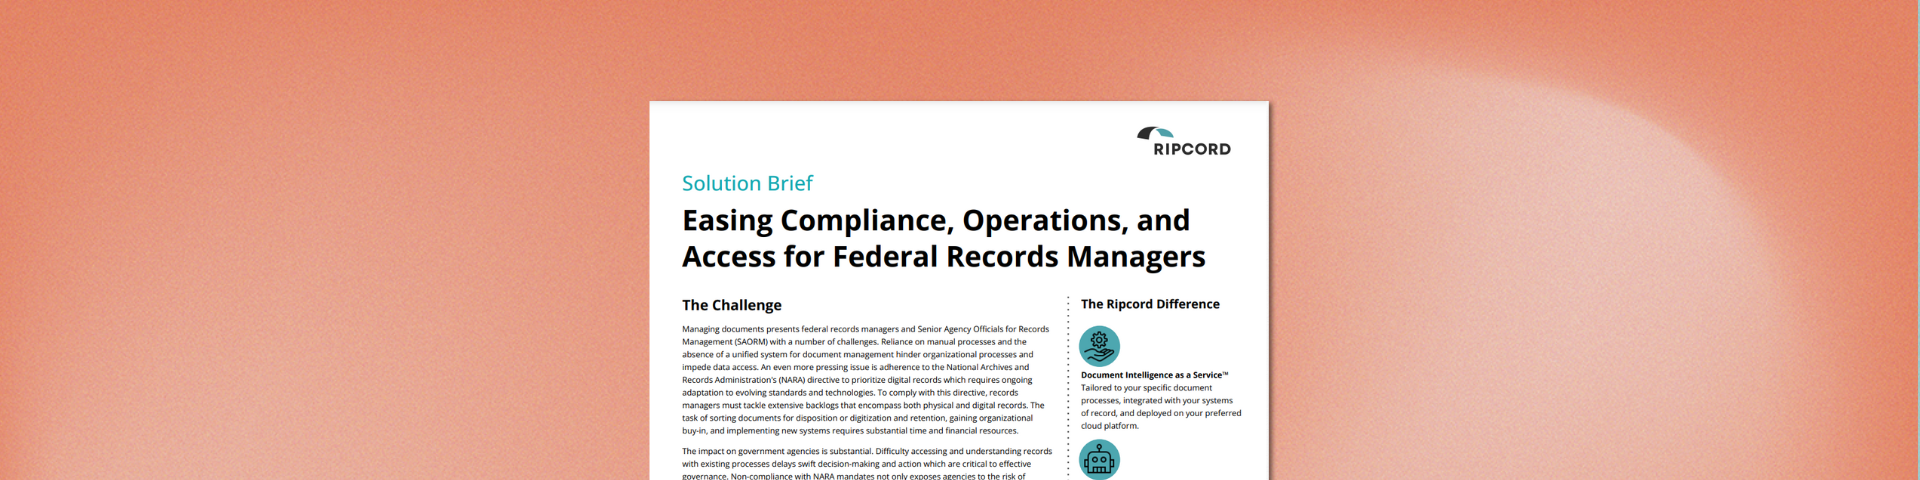 Federal Records Managers Solution Brief - Ripcord